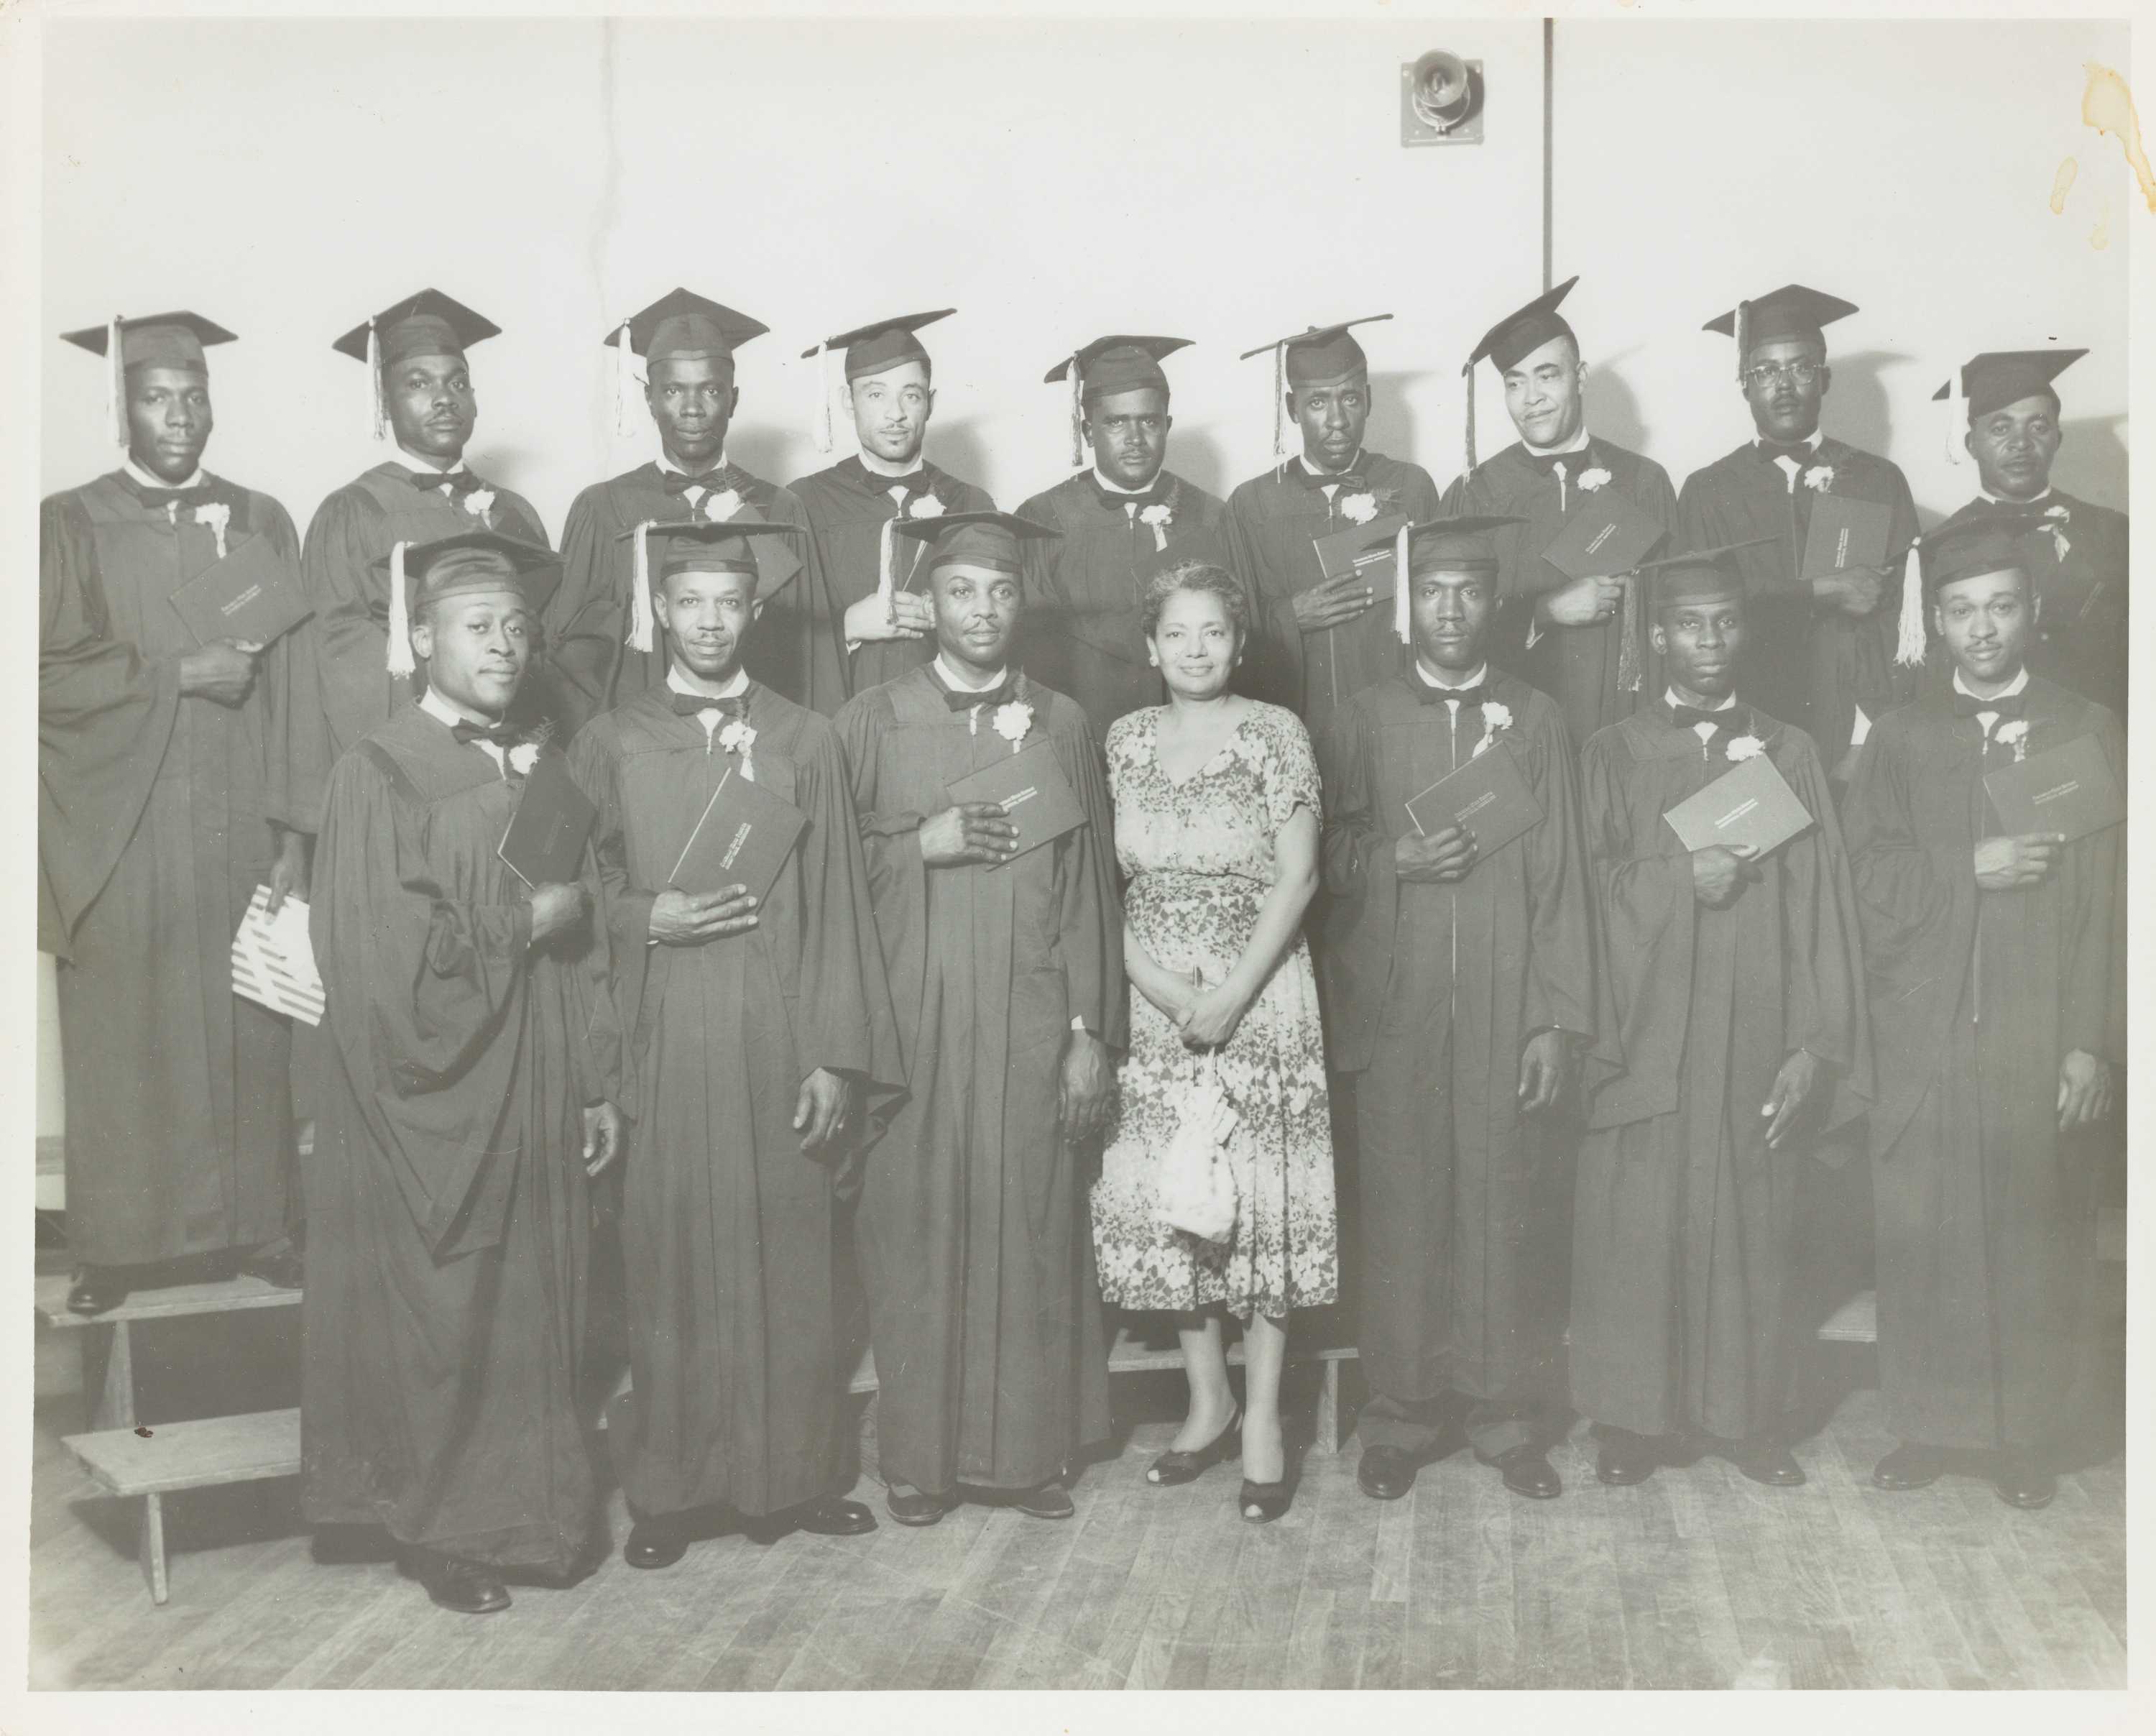 Group portrait of young men wearing graduation caps and gowns.  Each man holds his diploma to his chest with right hand.  In the middle of the first row an unidentified woman poses with them.